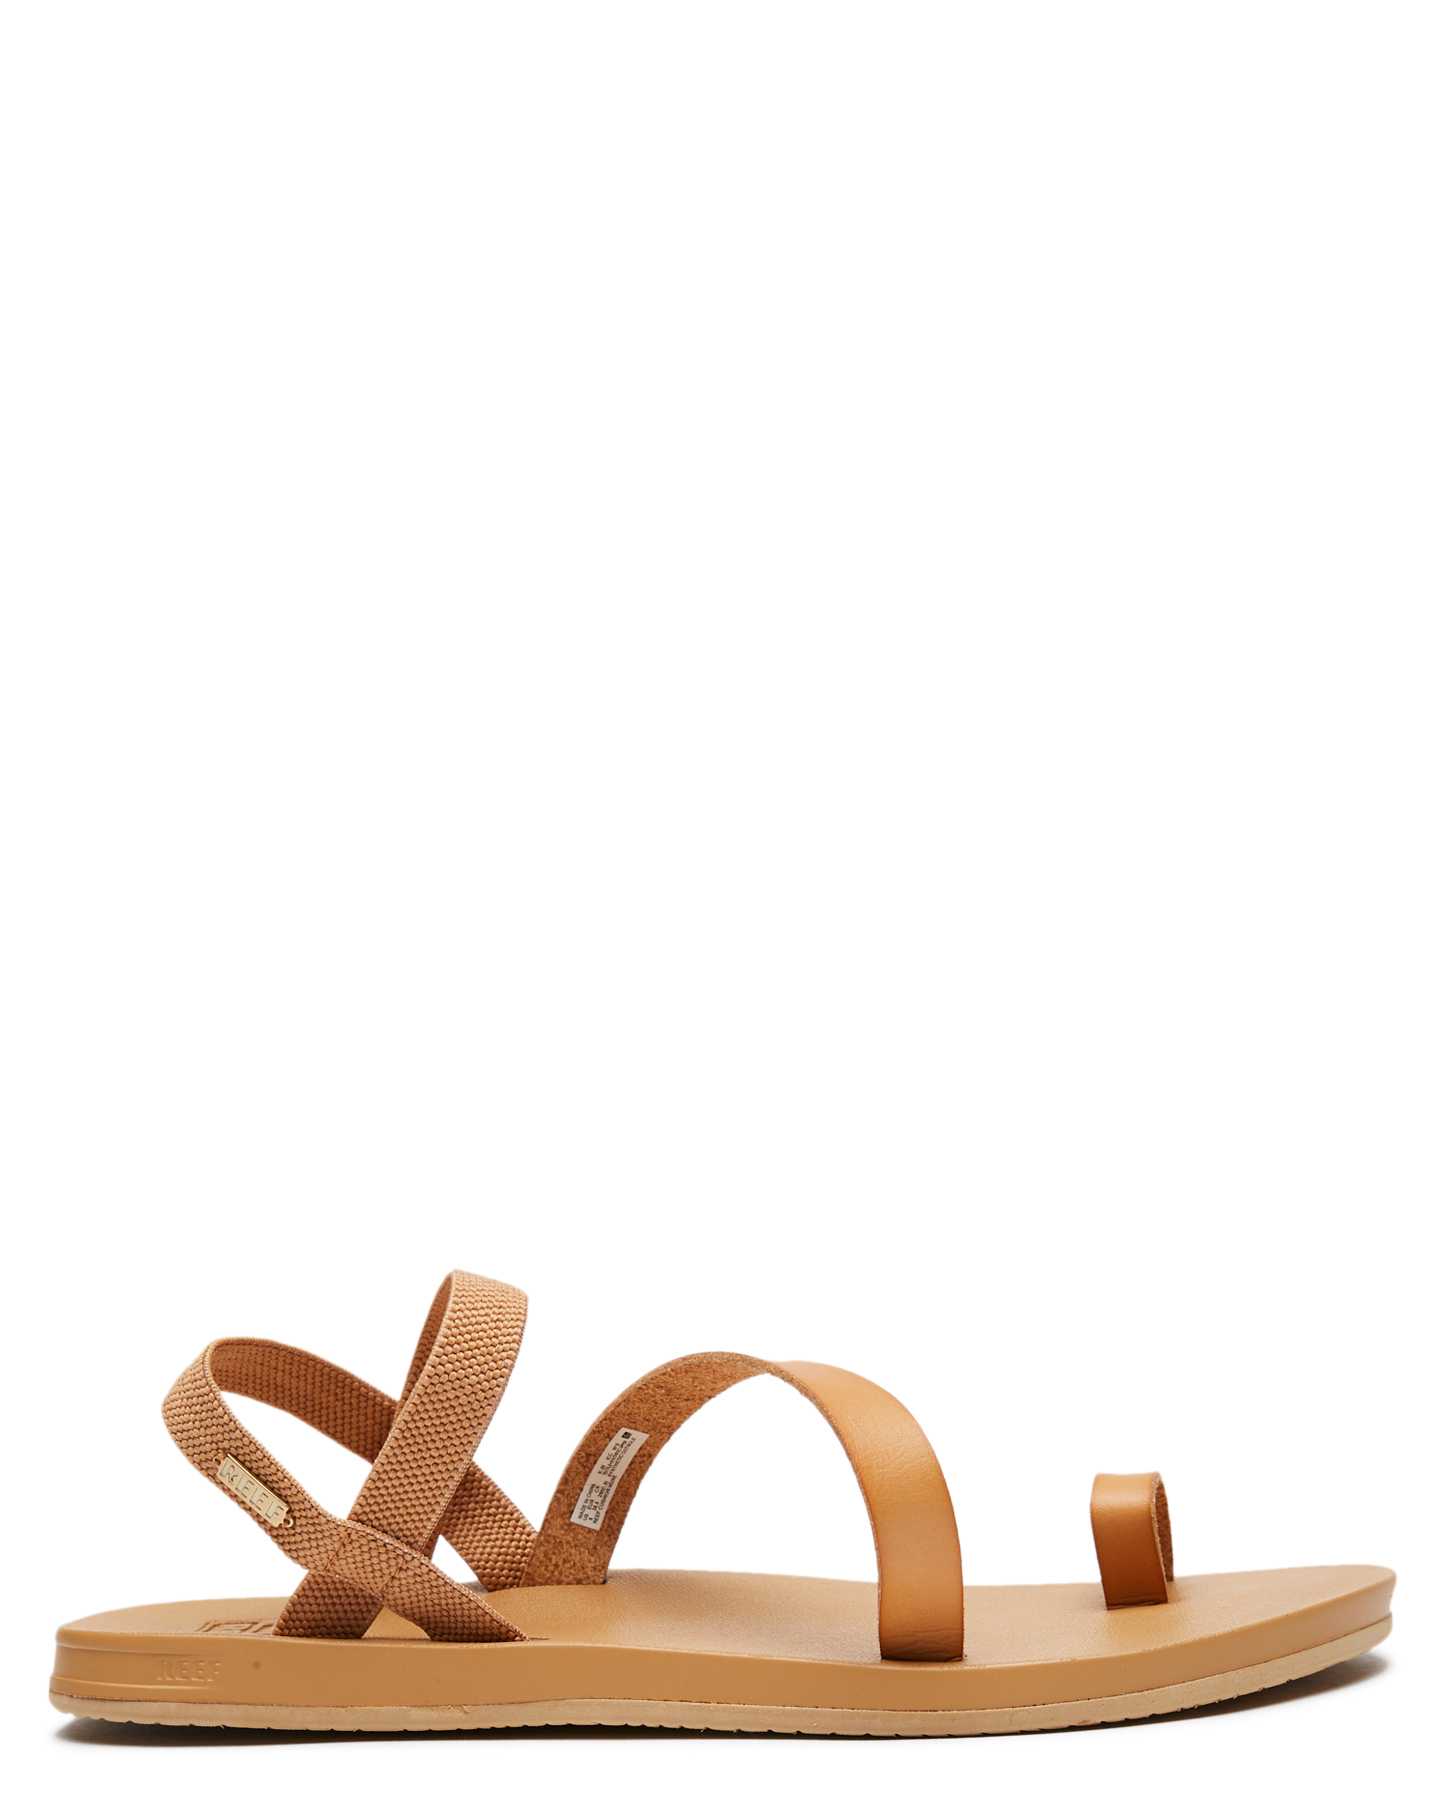 Reef Womens Cushion Bounce Muse Sandal - Natural | SurfStitch